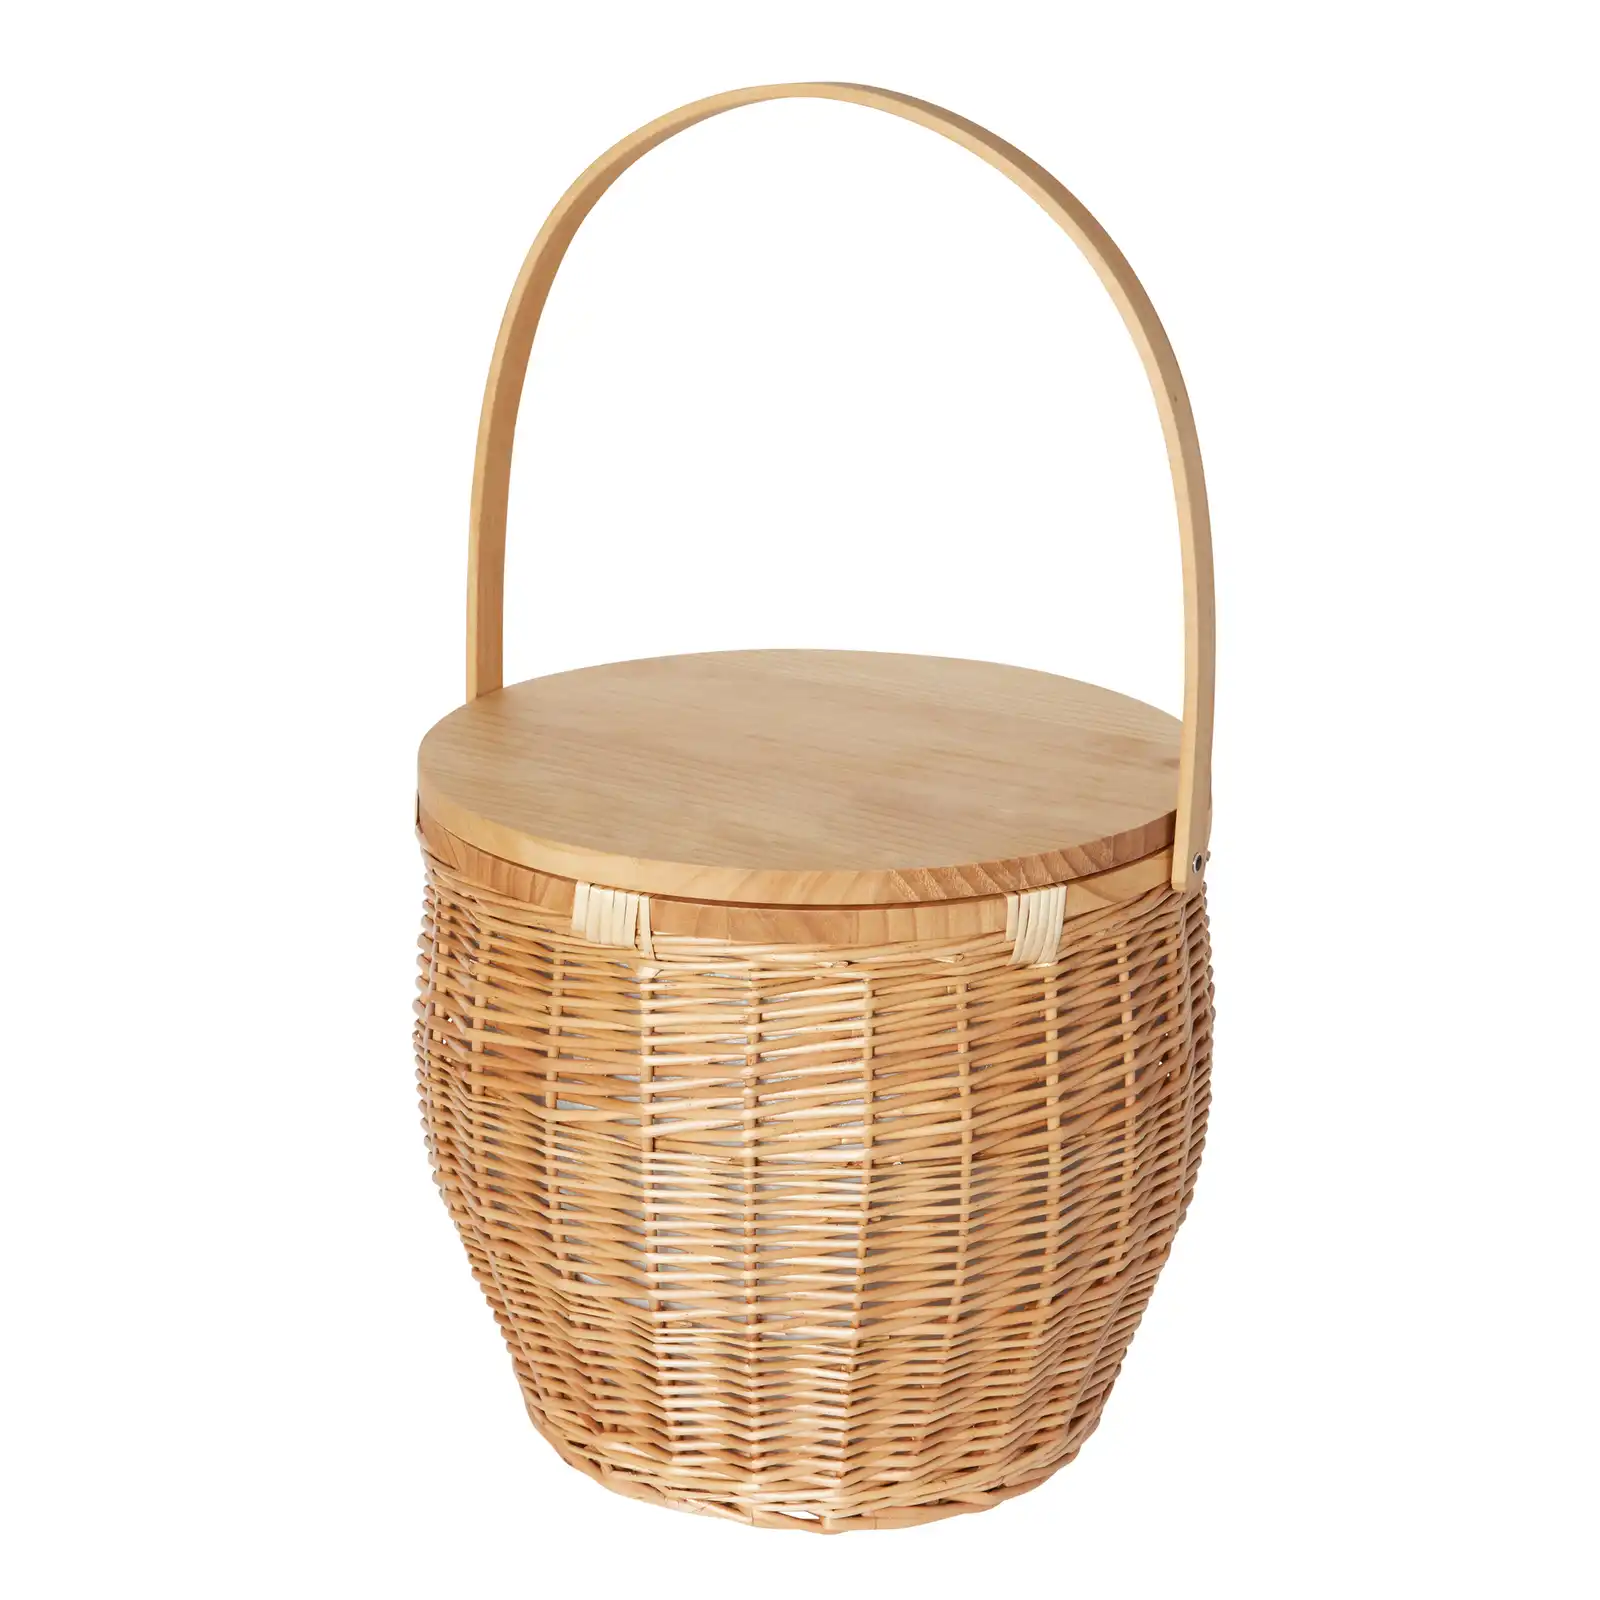 TGP Luxury Insulated Wicker Picnic Basket with Wooden Lid & Handle - Large Round